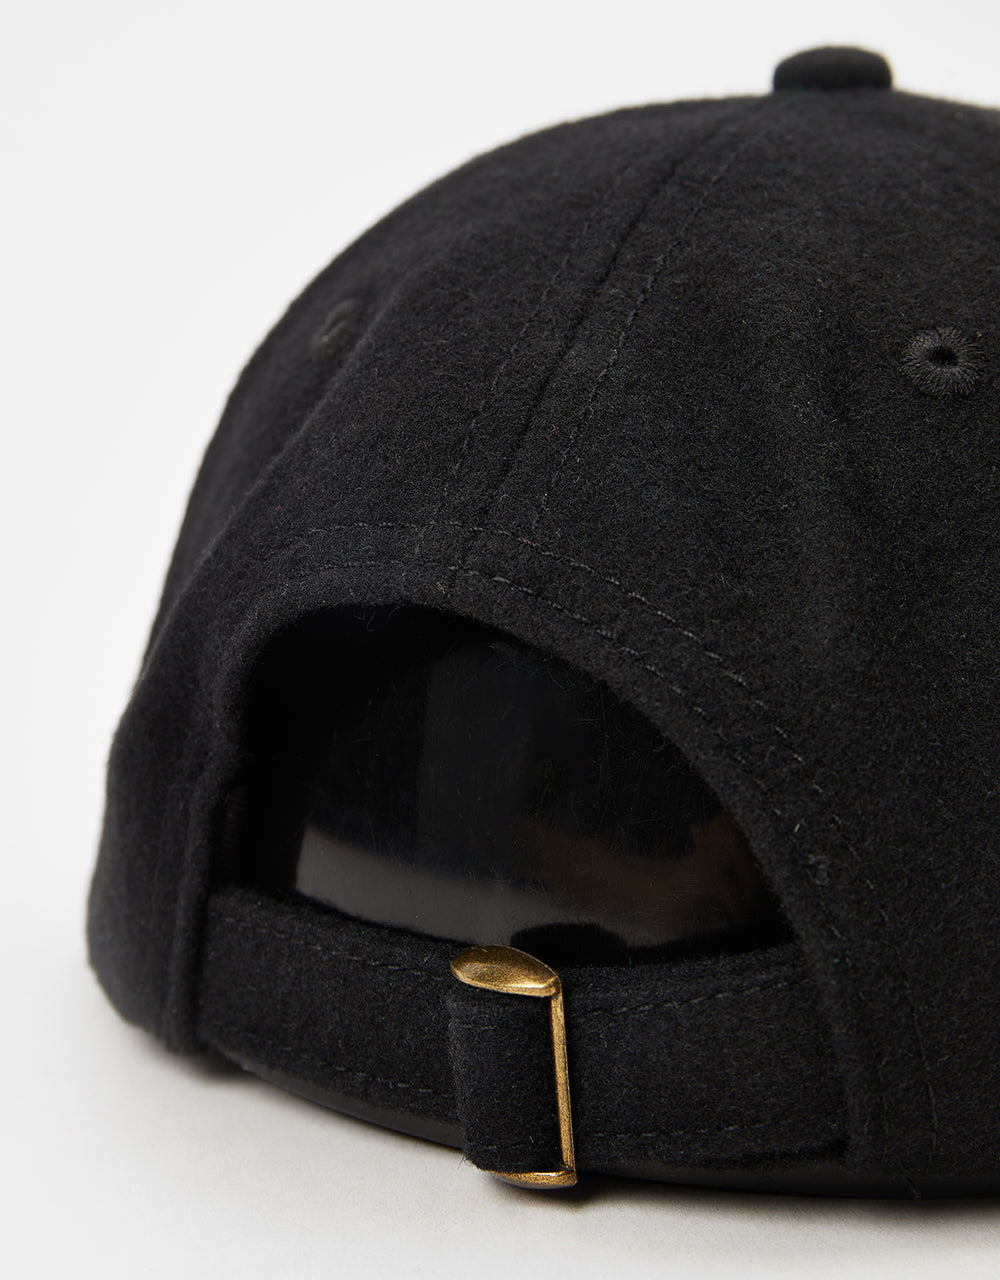 Route One Unstructured Melton Wool Cap - Black